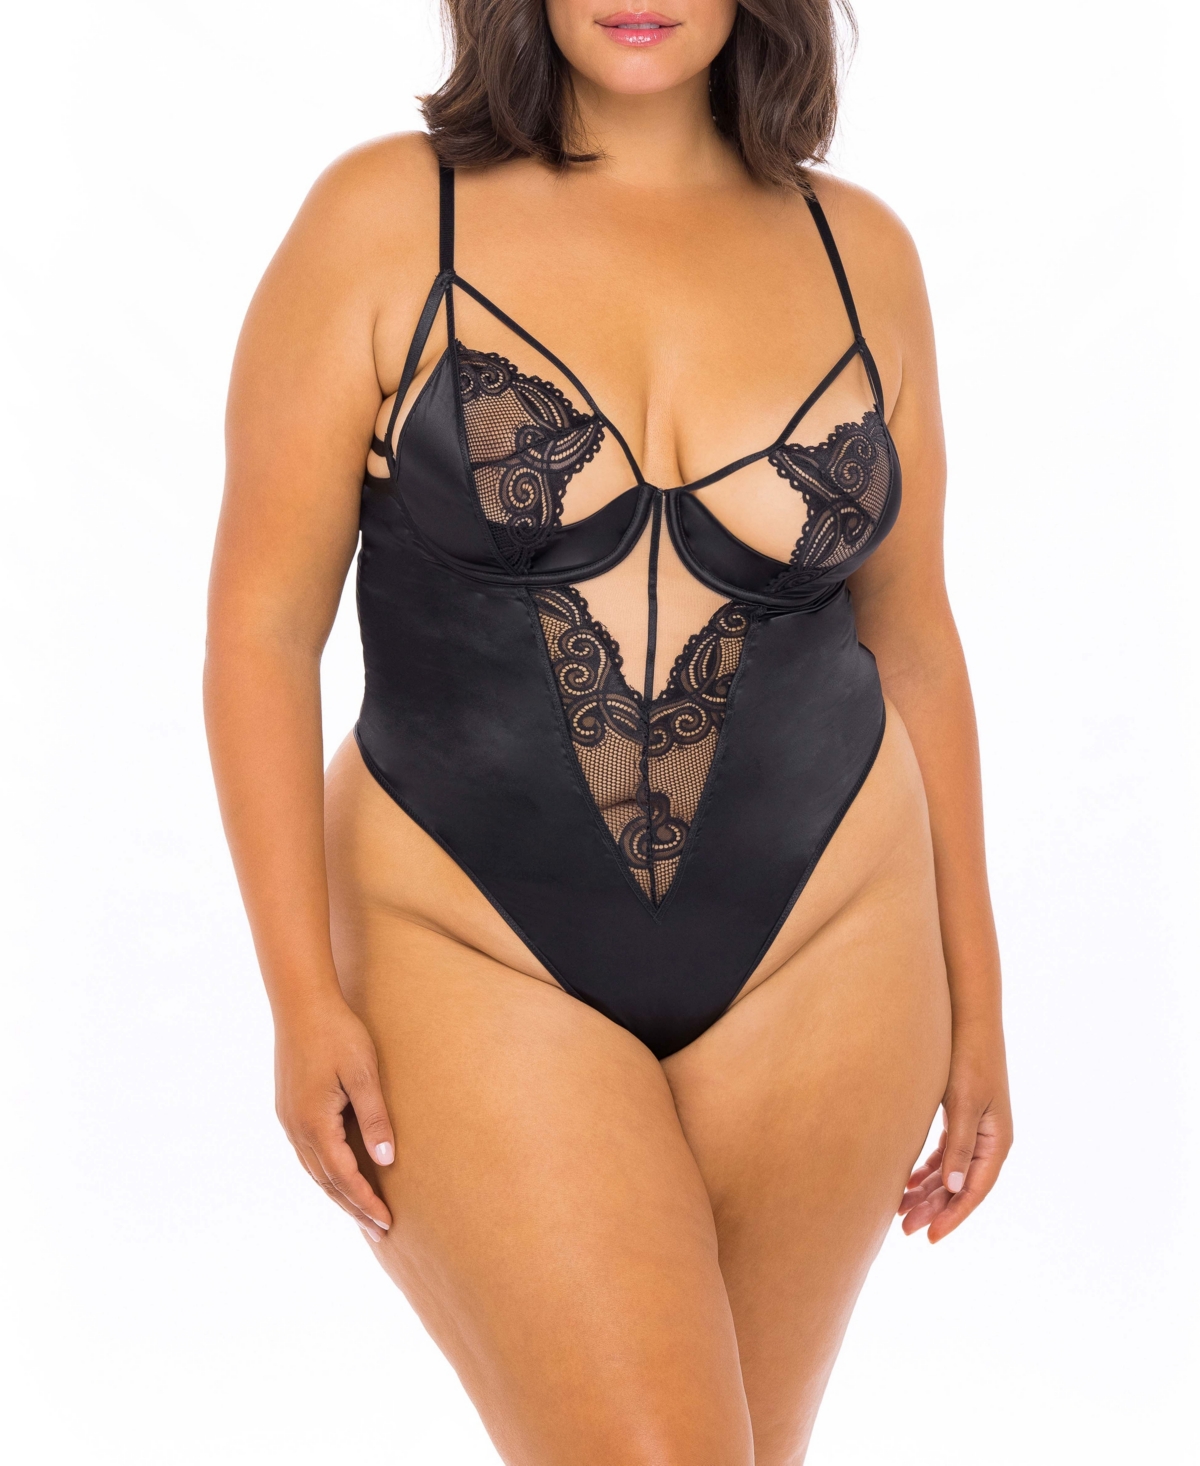 Plus Size Underwire Teddy Featuring Art Deco Lace with A Thong Back, 2pc Lingerie Set - Black